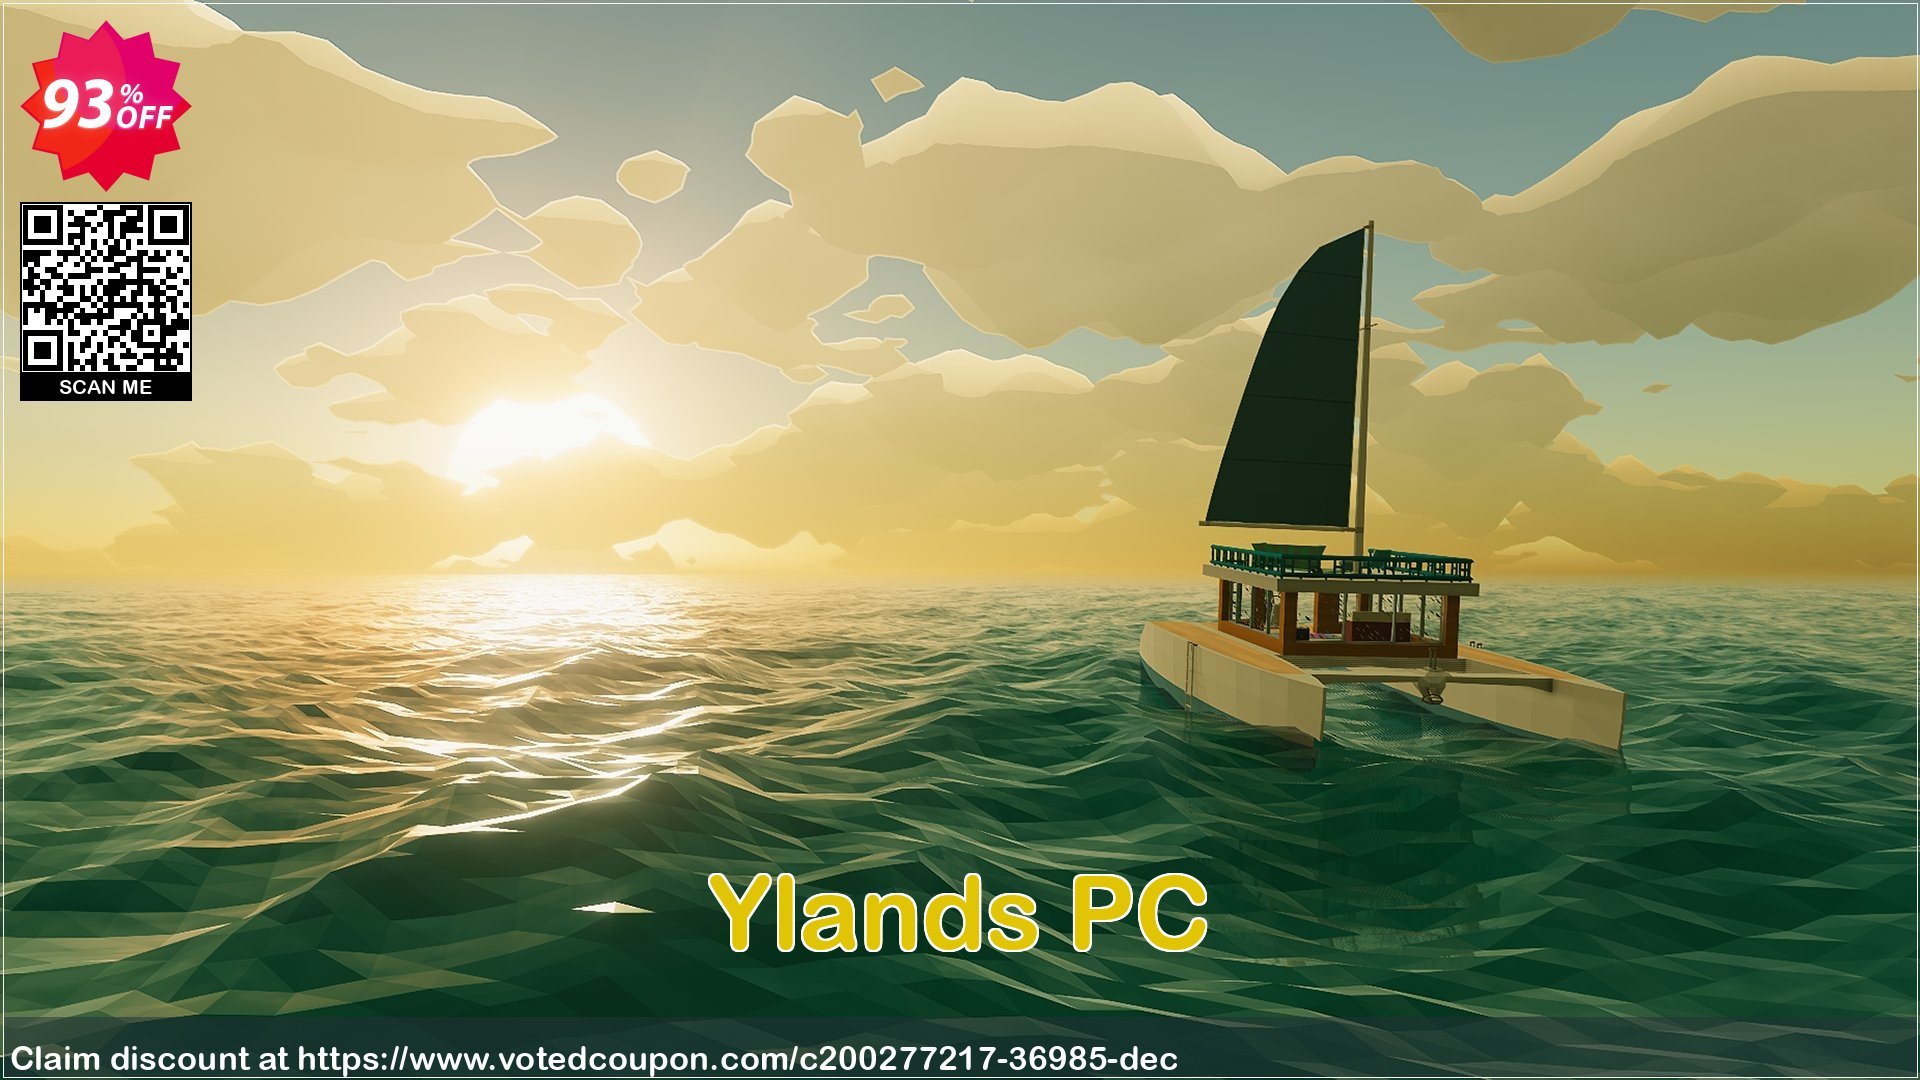 Ylands PC Coupon Code May 2024, 93% OFF - VotedCoupon